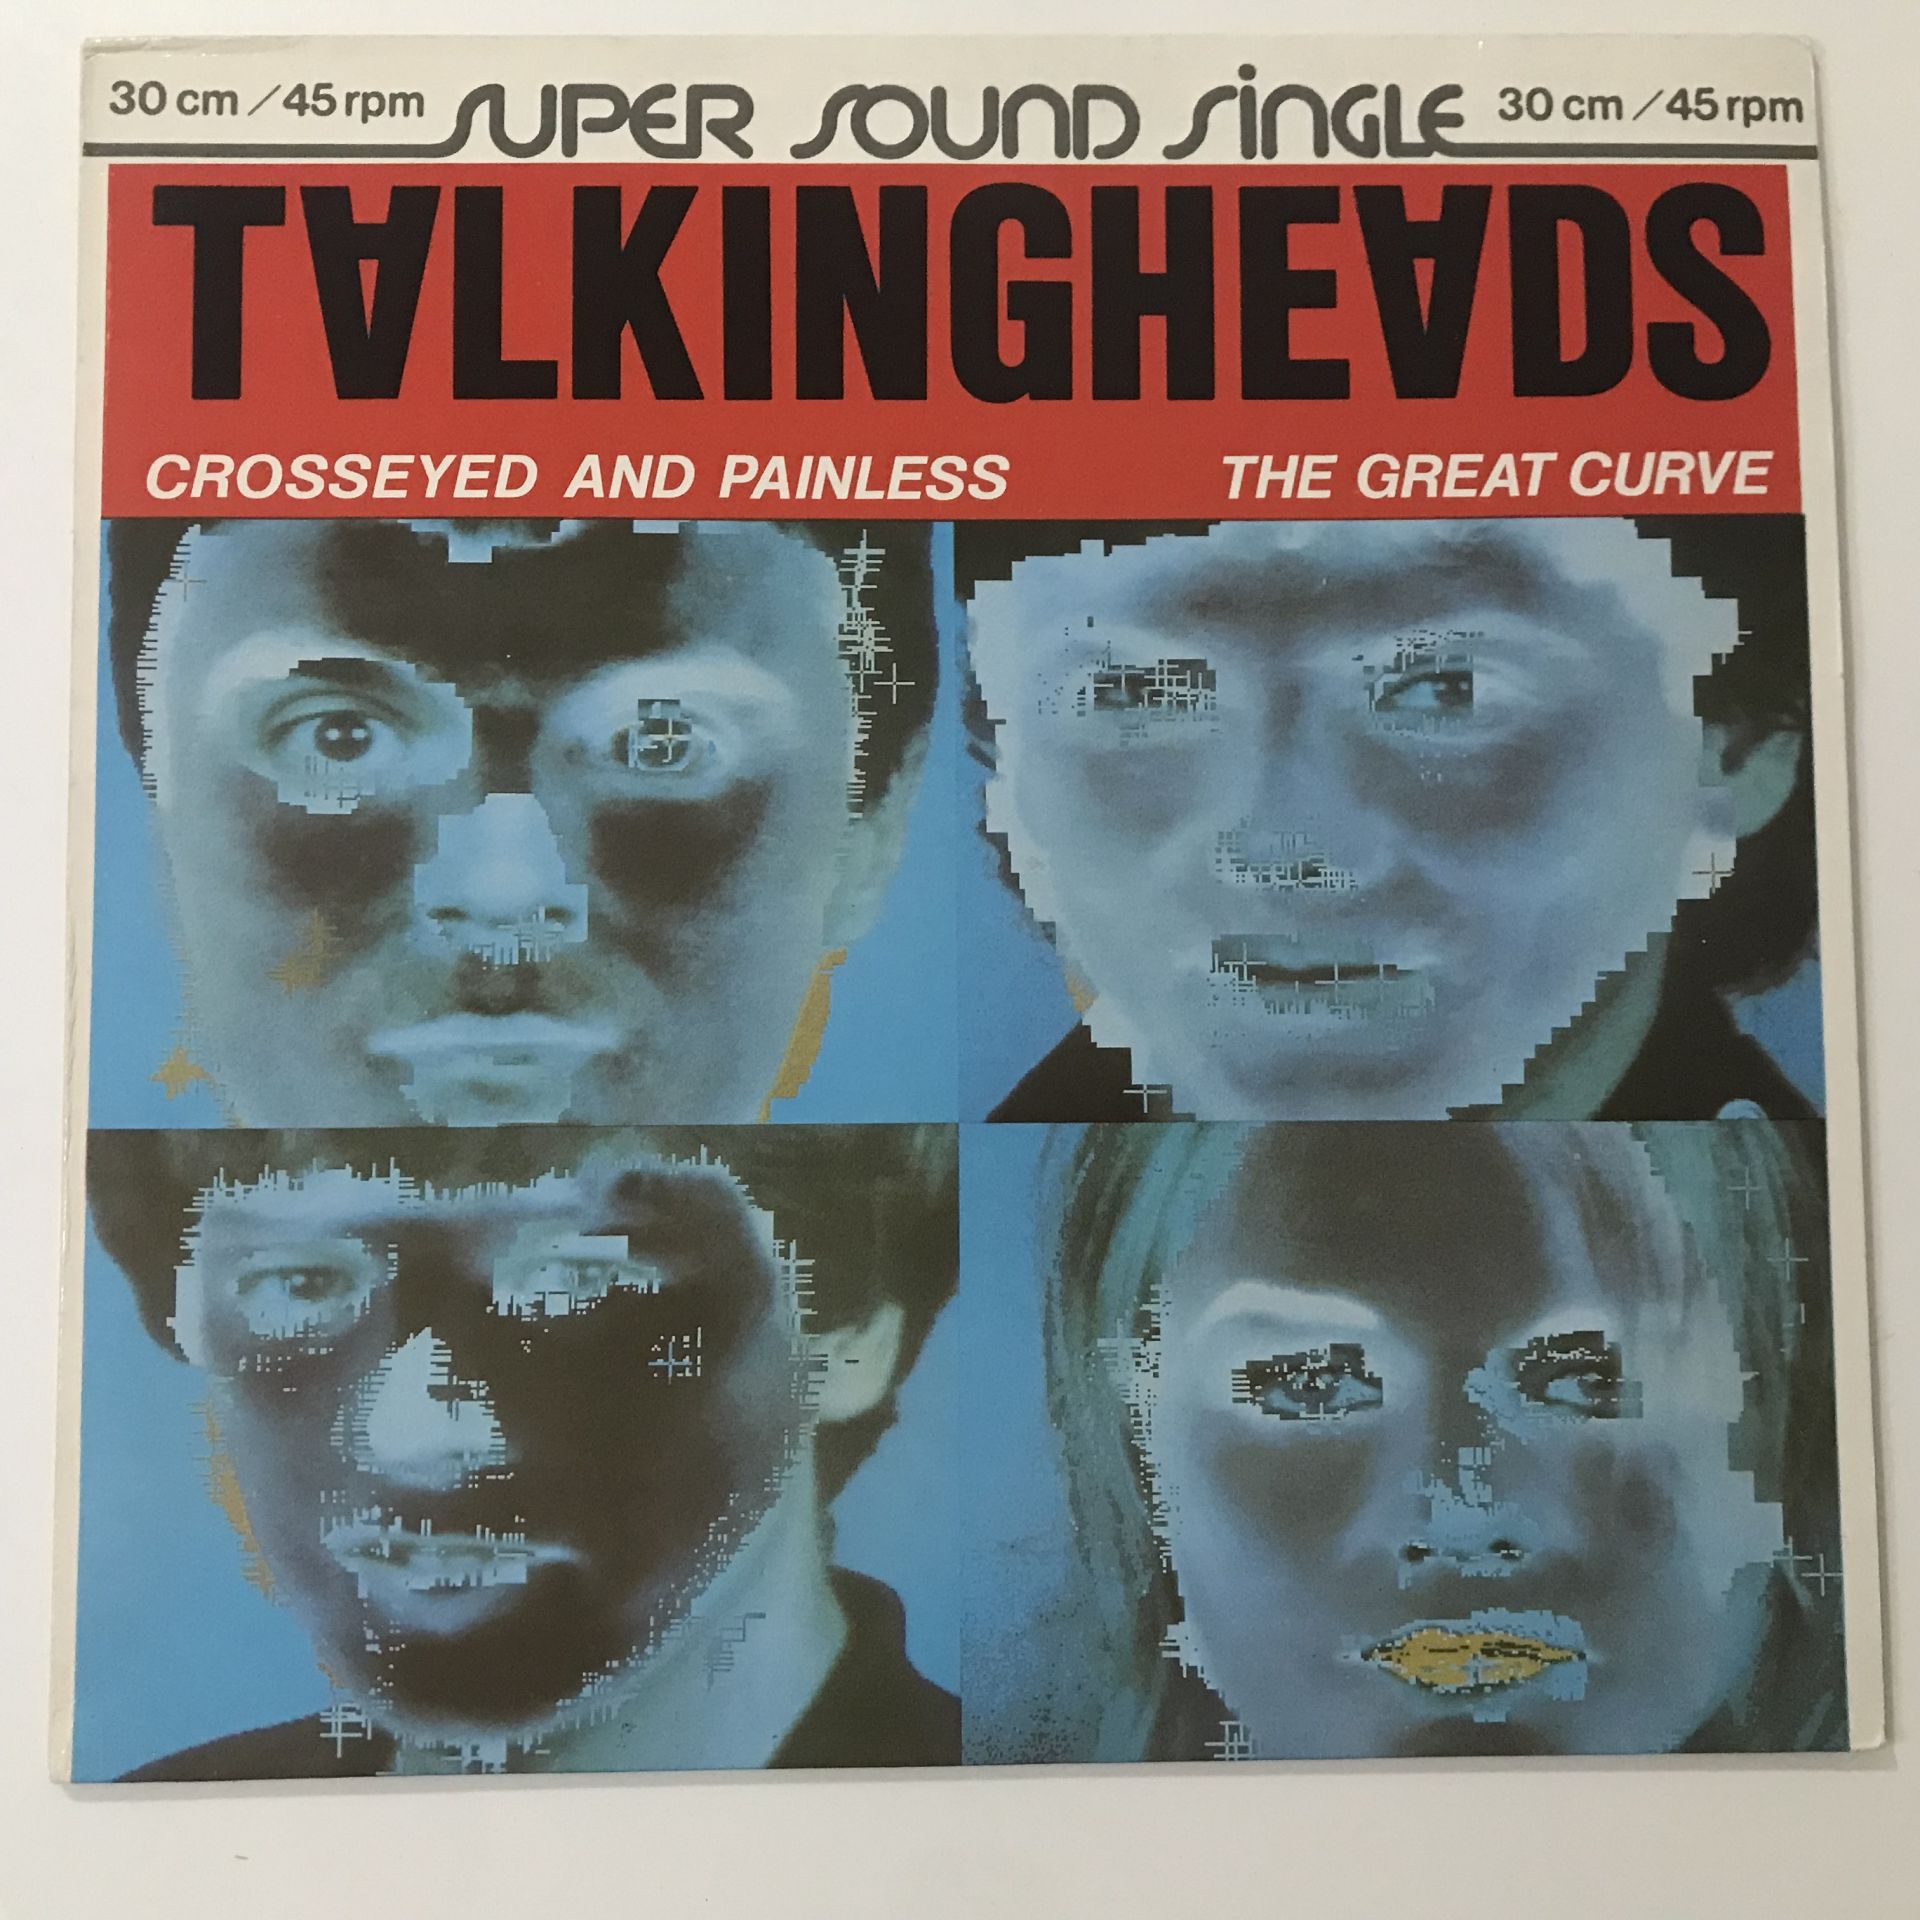 Talking Heads – Crosseyed And Painless / The Great Curve